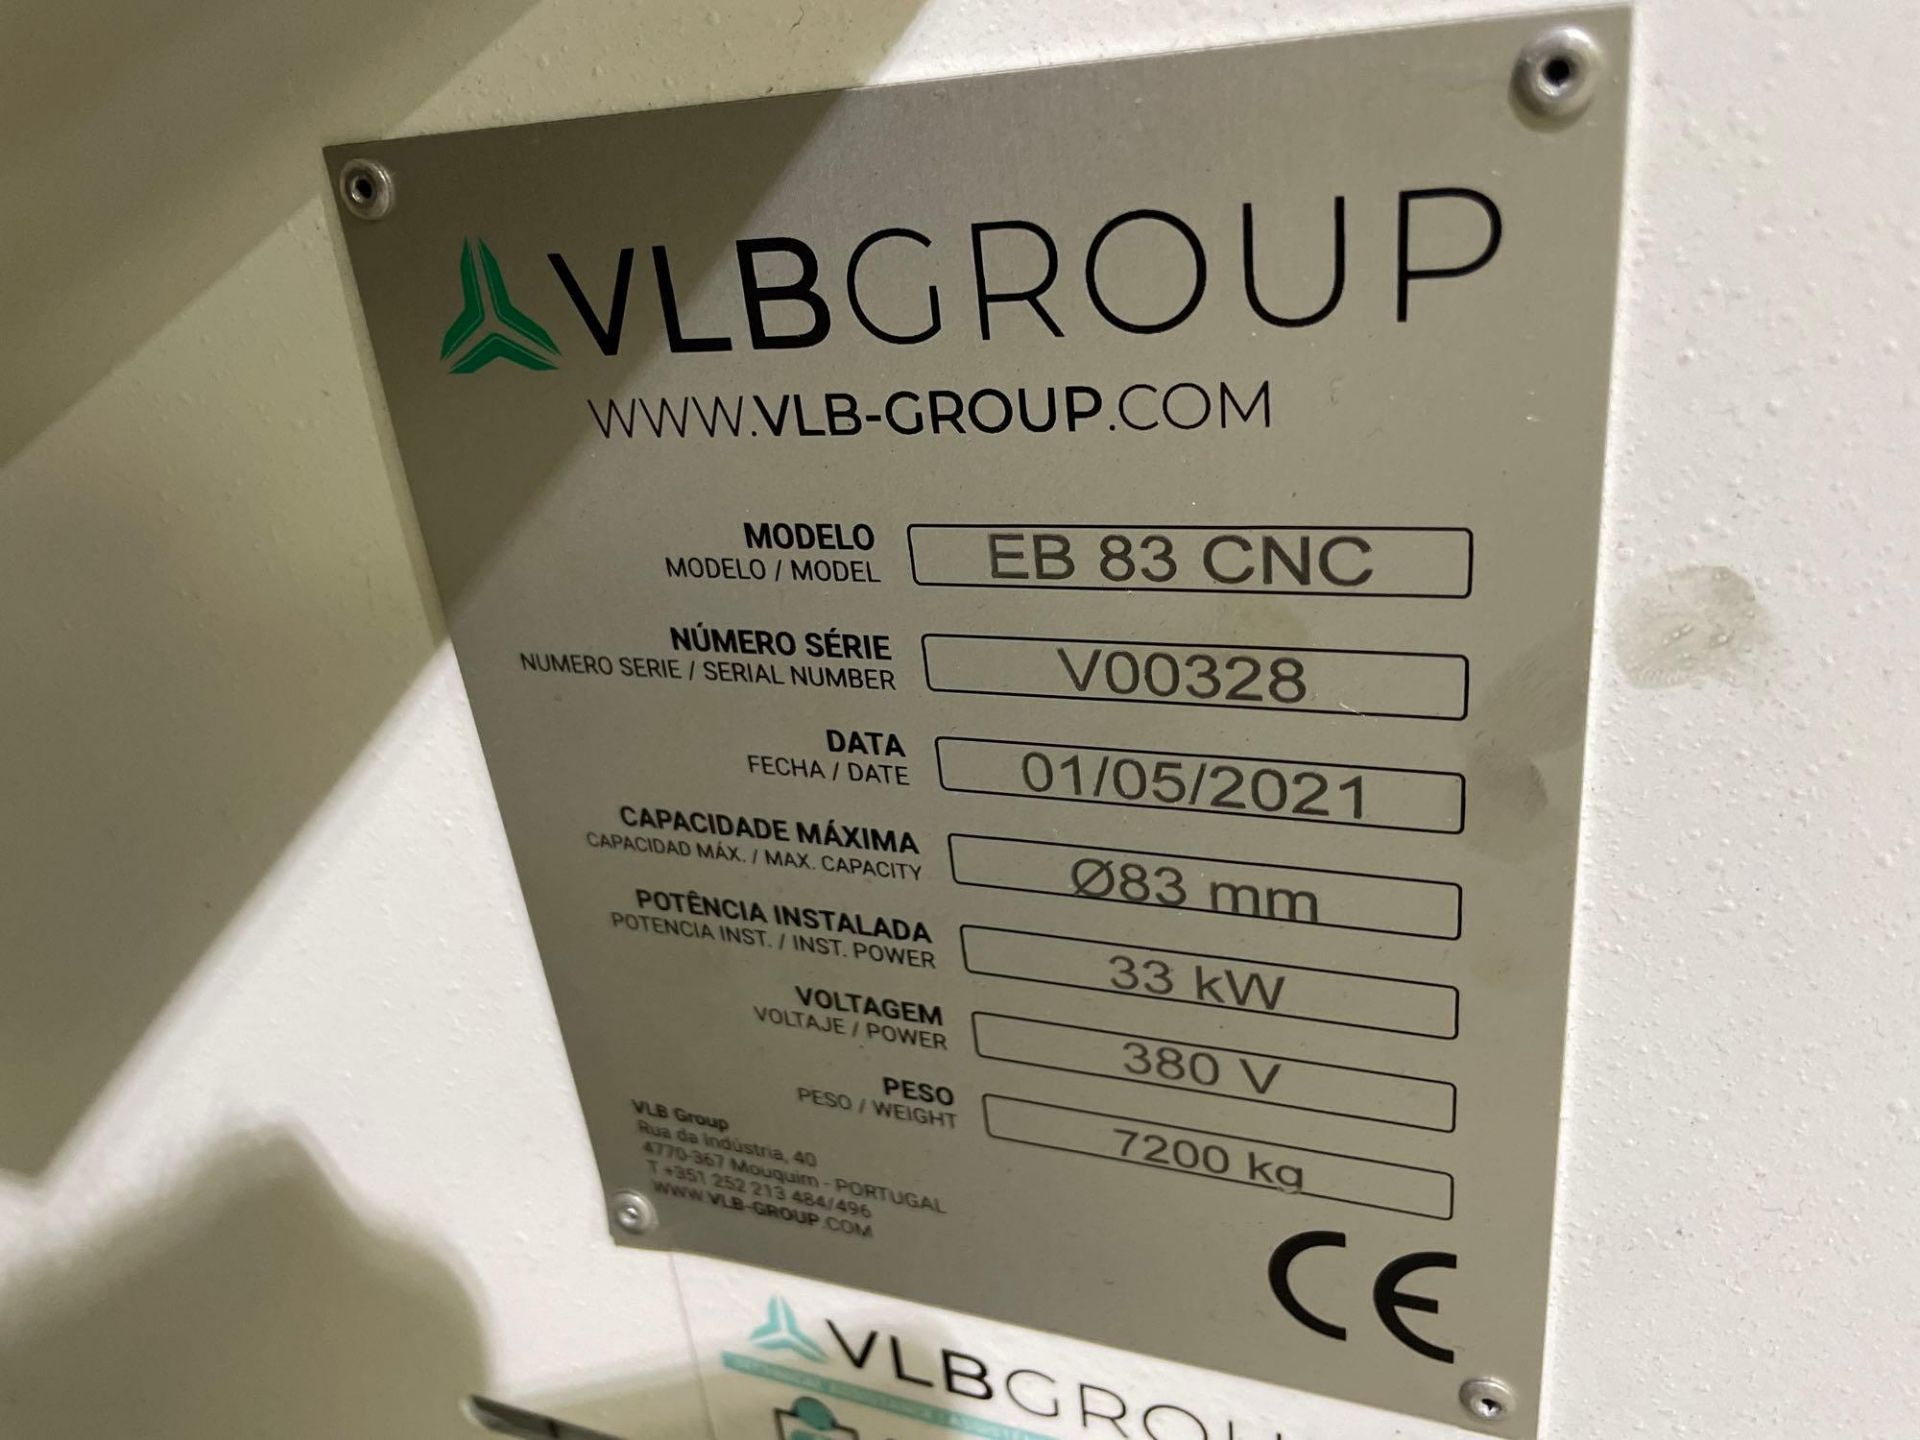 VLB Group EB 83 CNC 3.26” Max dia., s/n V00328, New 2020, 375K Replacement Cost - Image 9 of 9